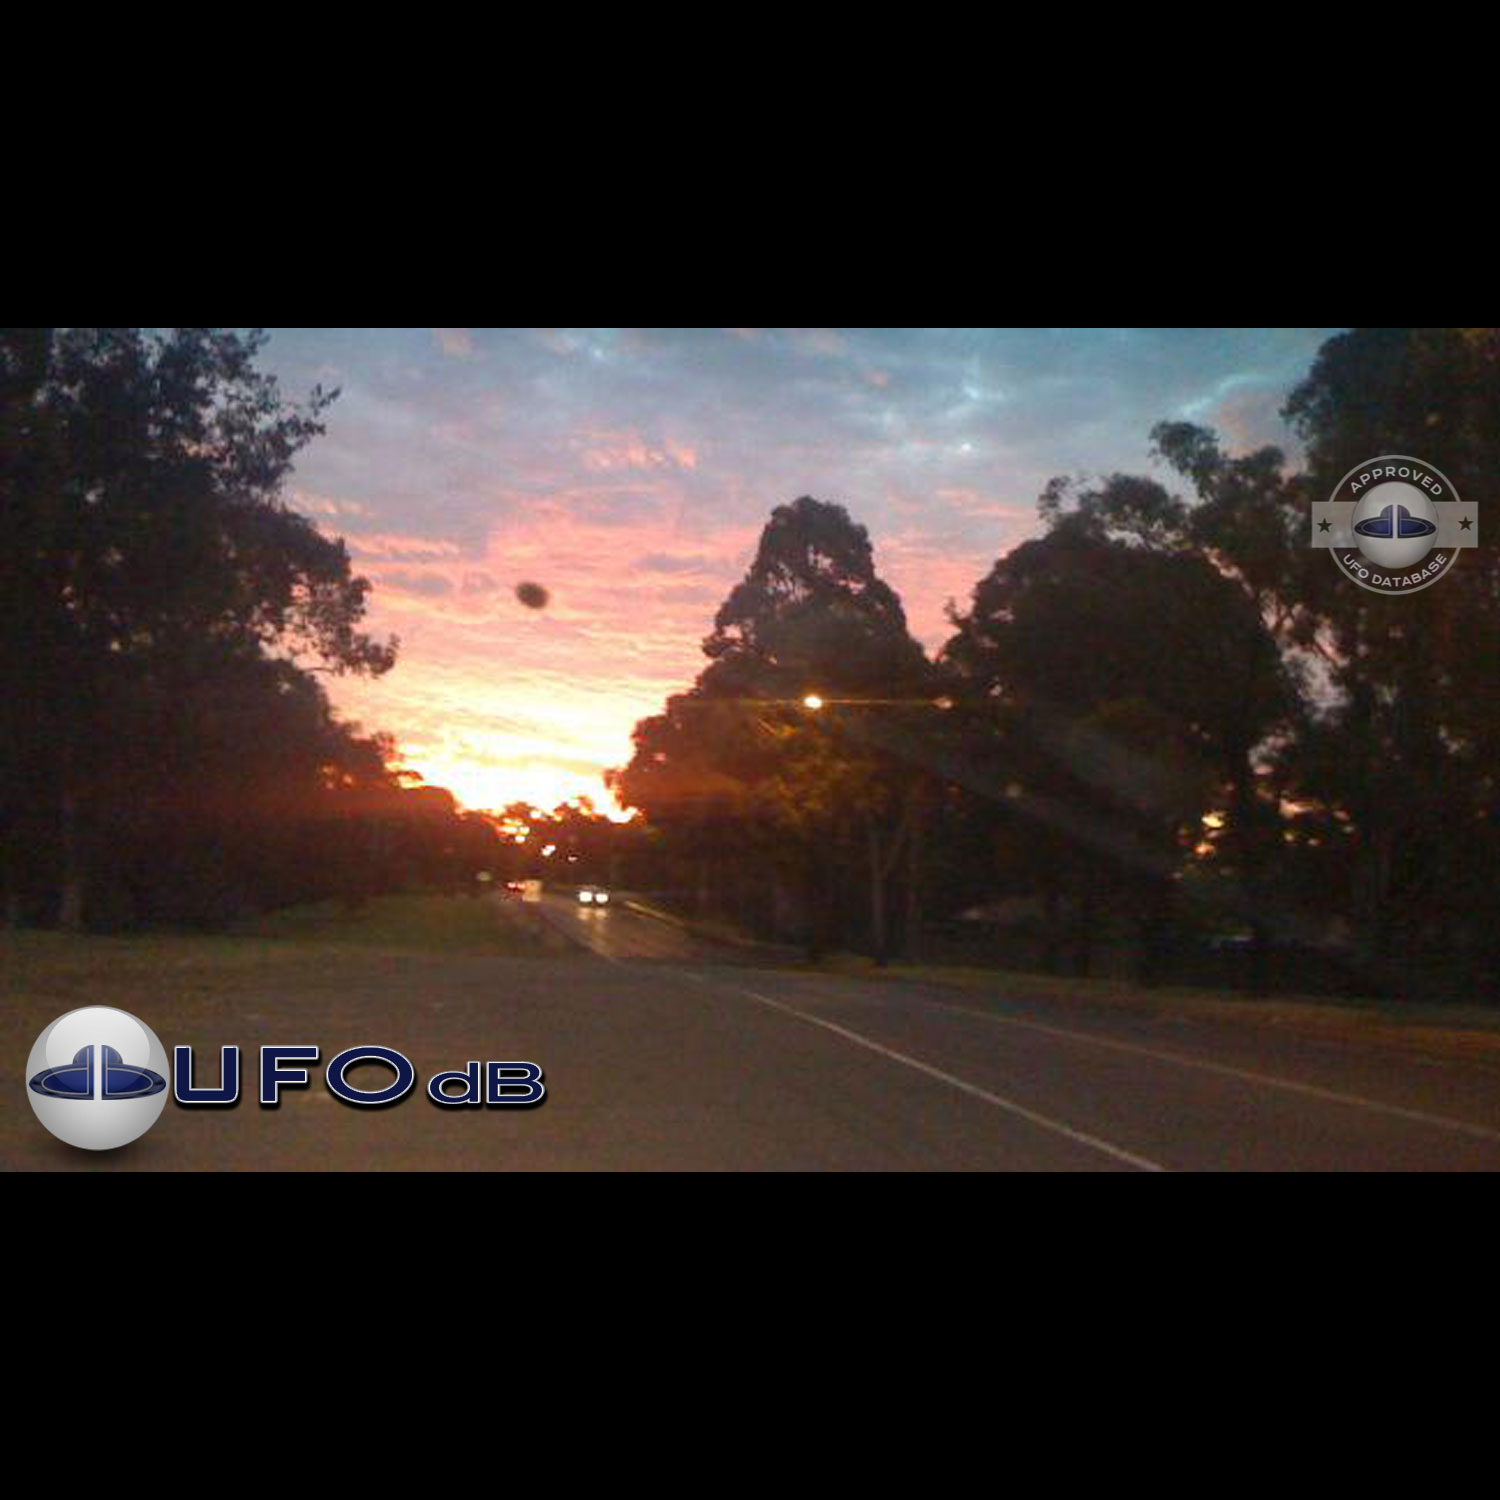 The UFO came out from a light in the cloudy sky during sunset UFO Picture #76-1